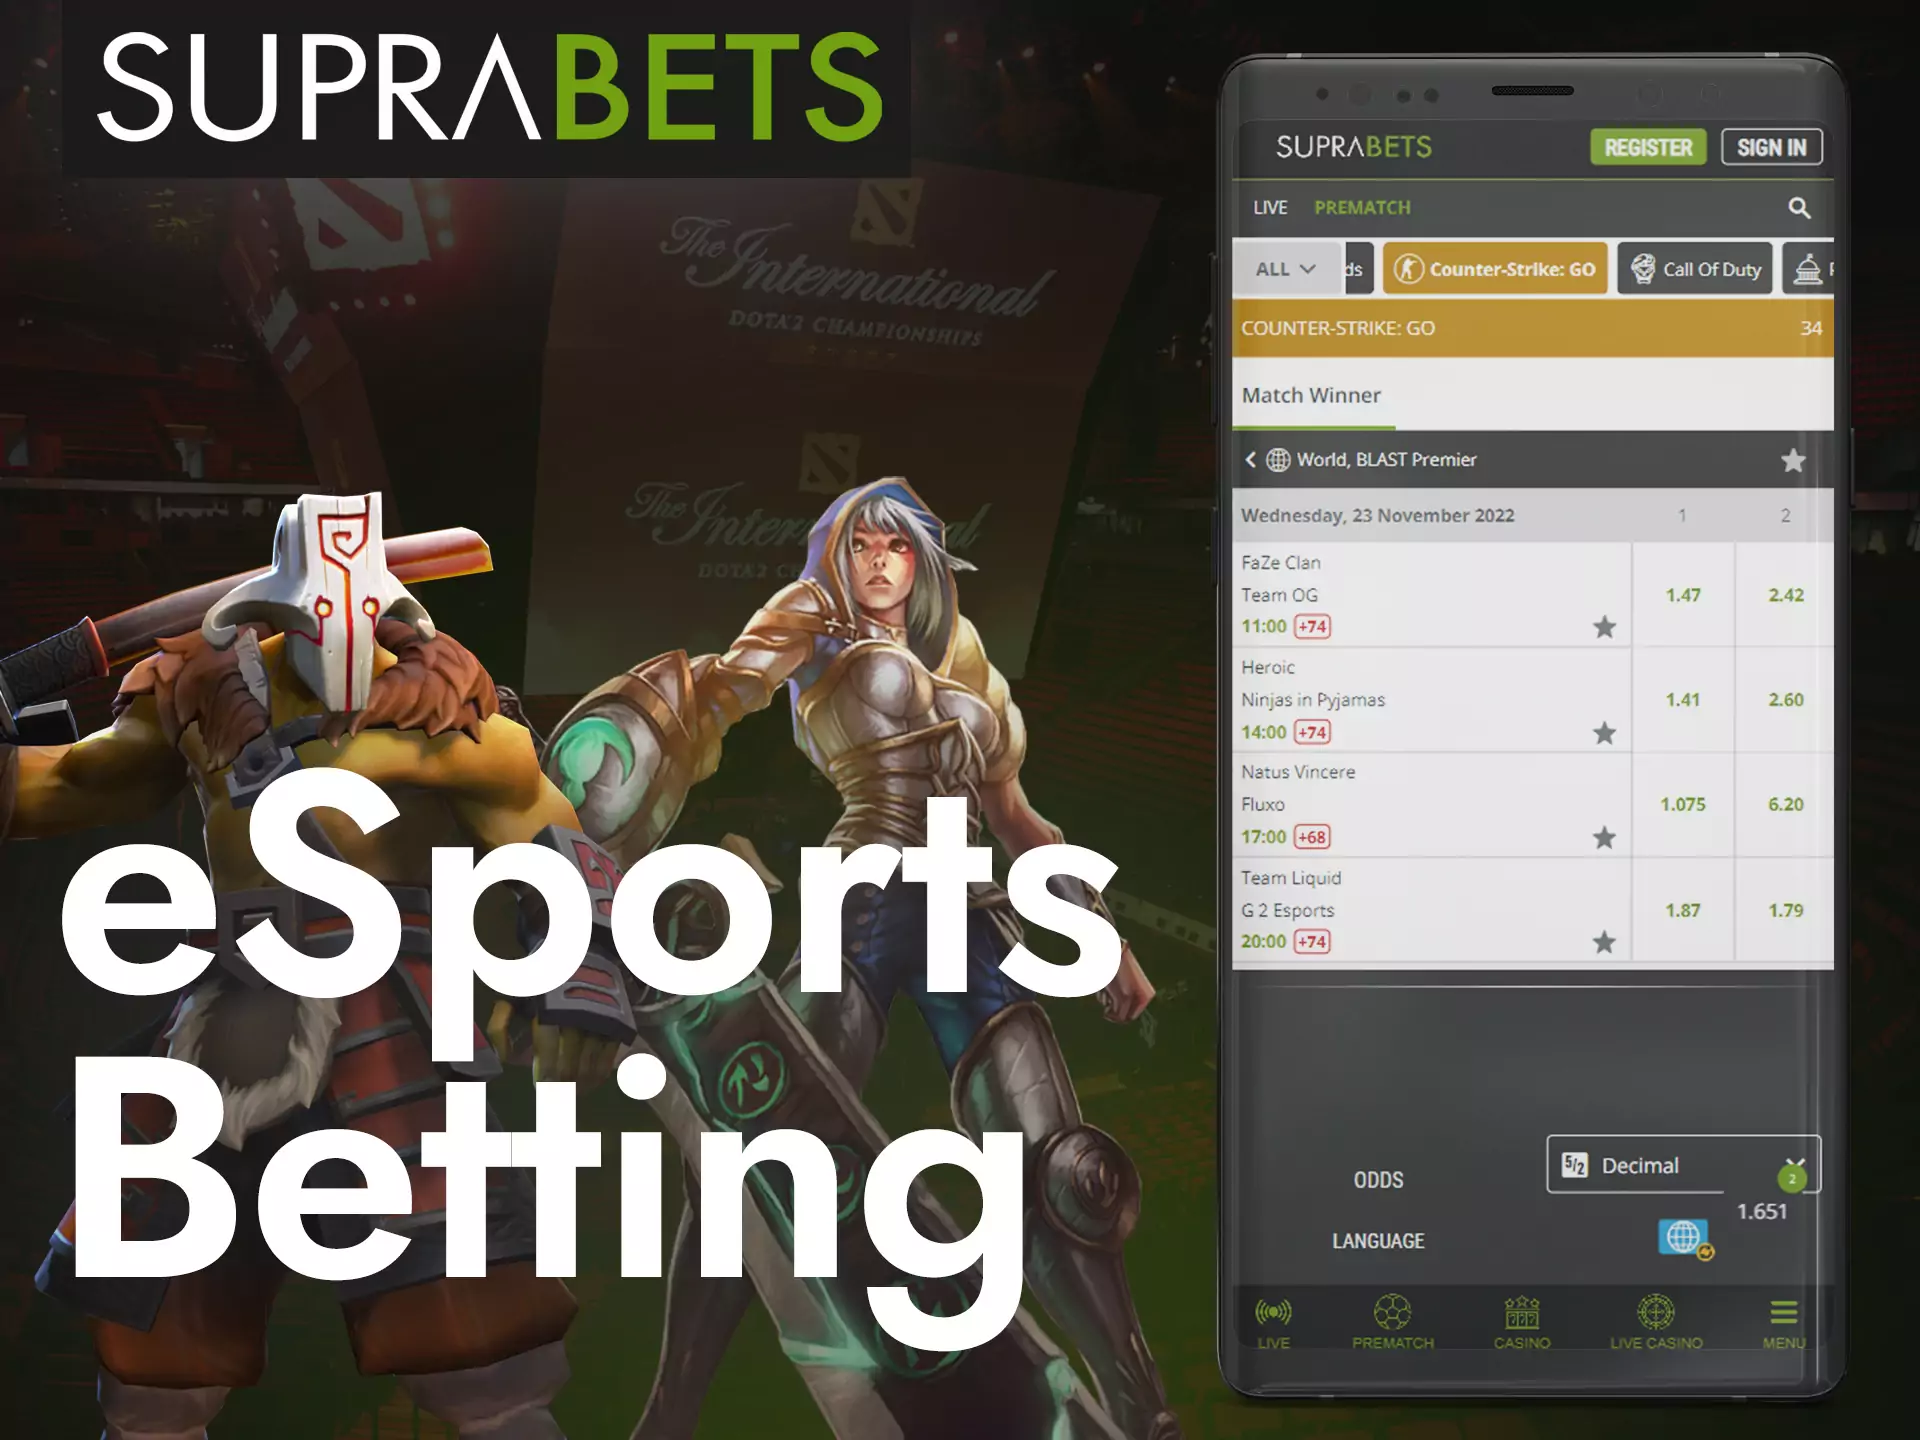 Suprabets offers all esports fans to bet on their favorite teams.